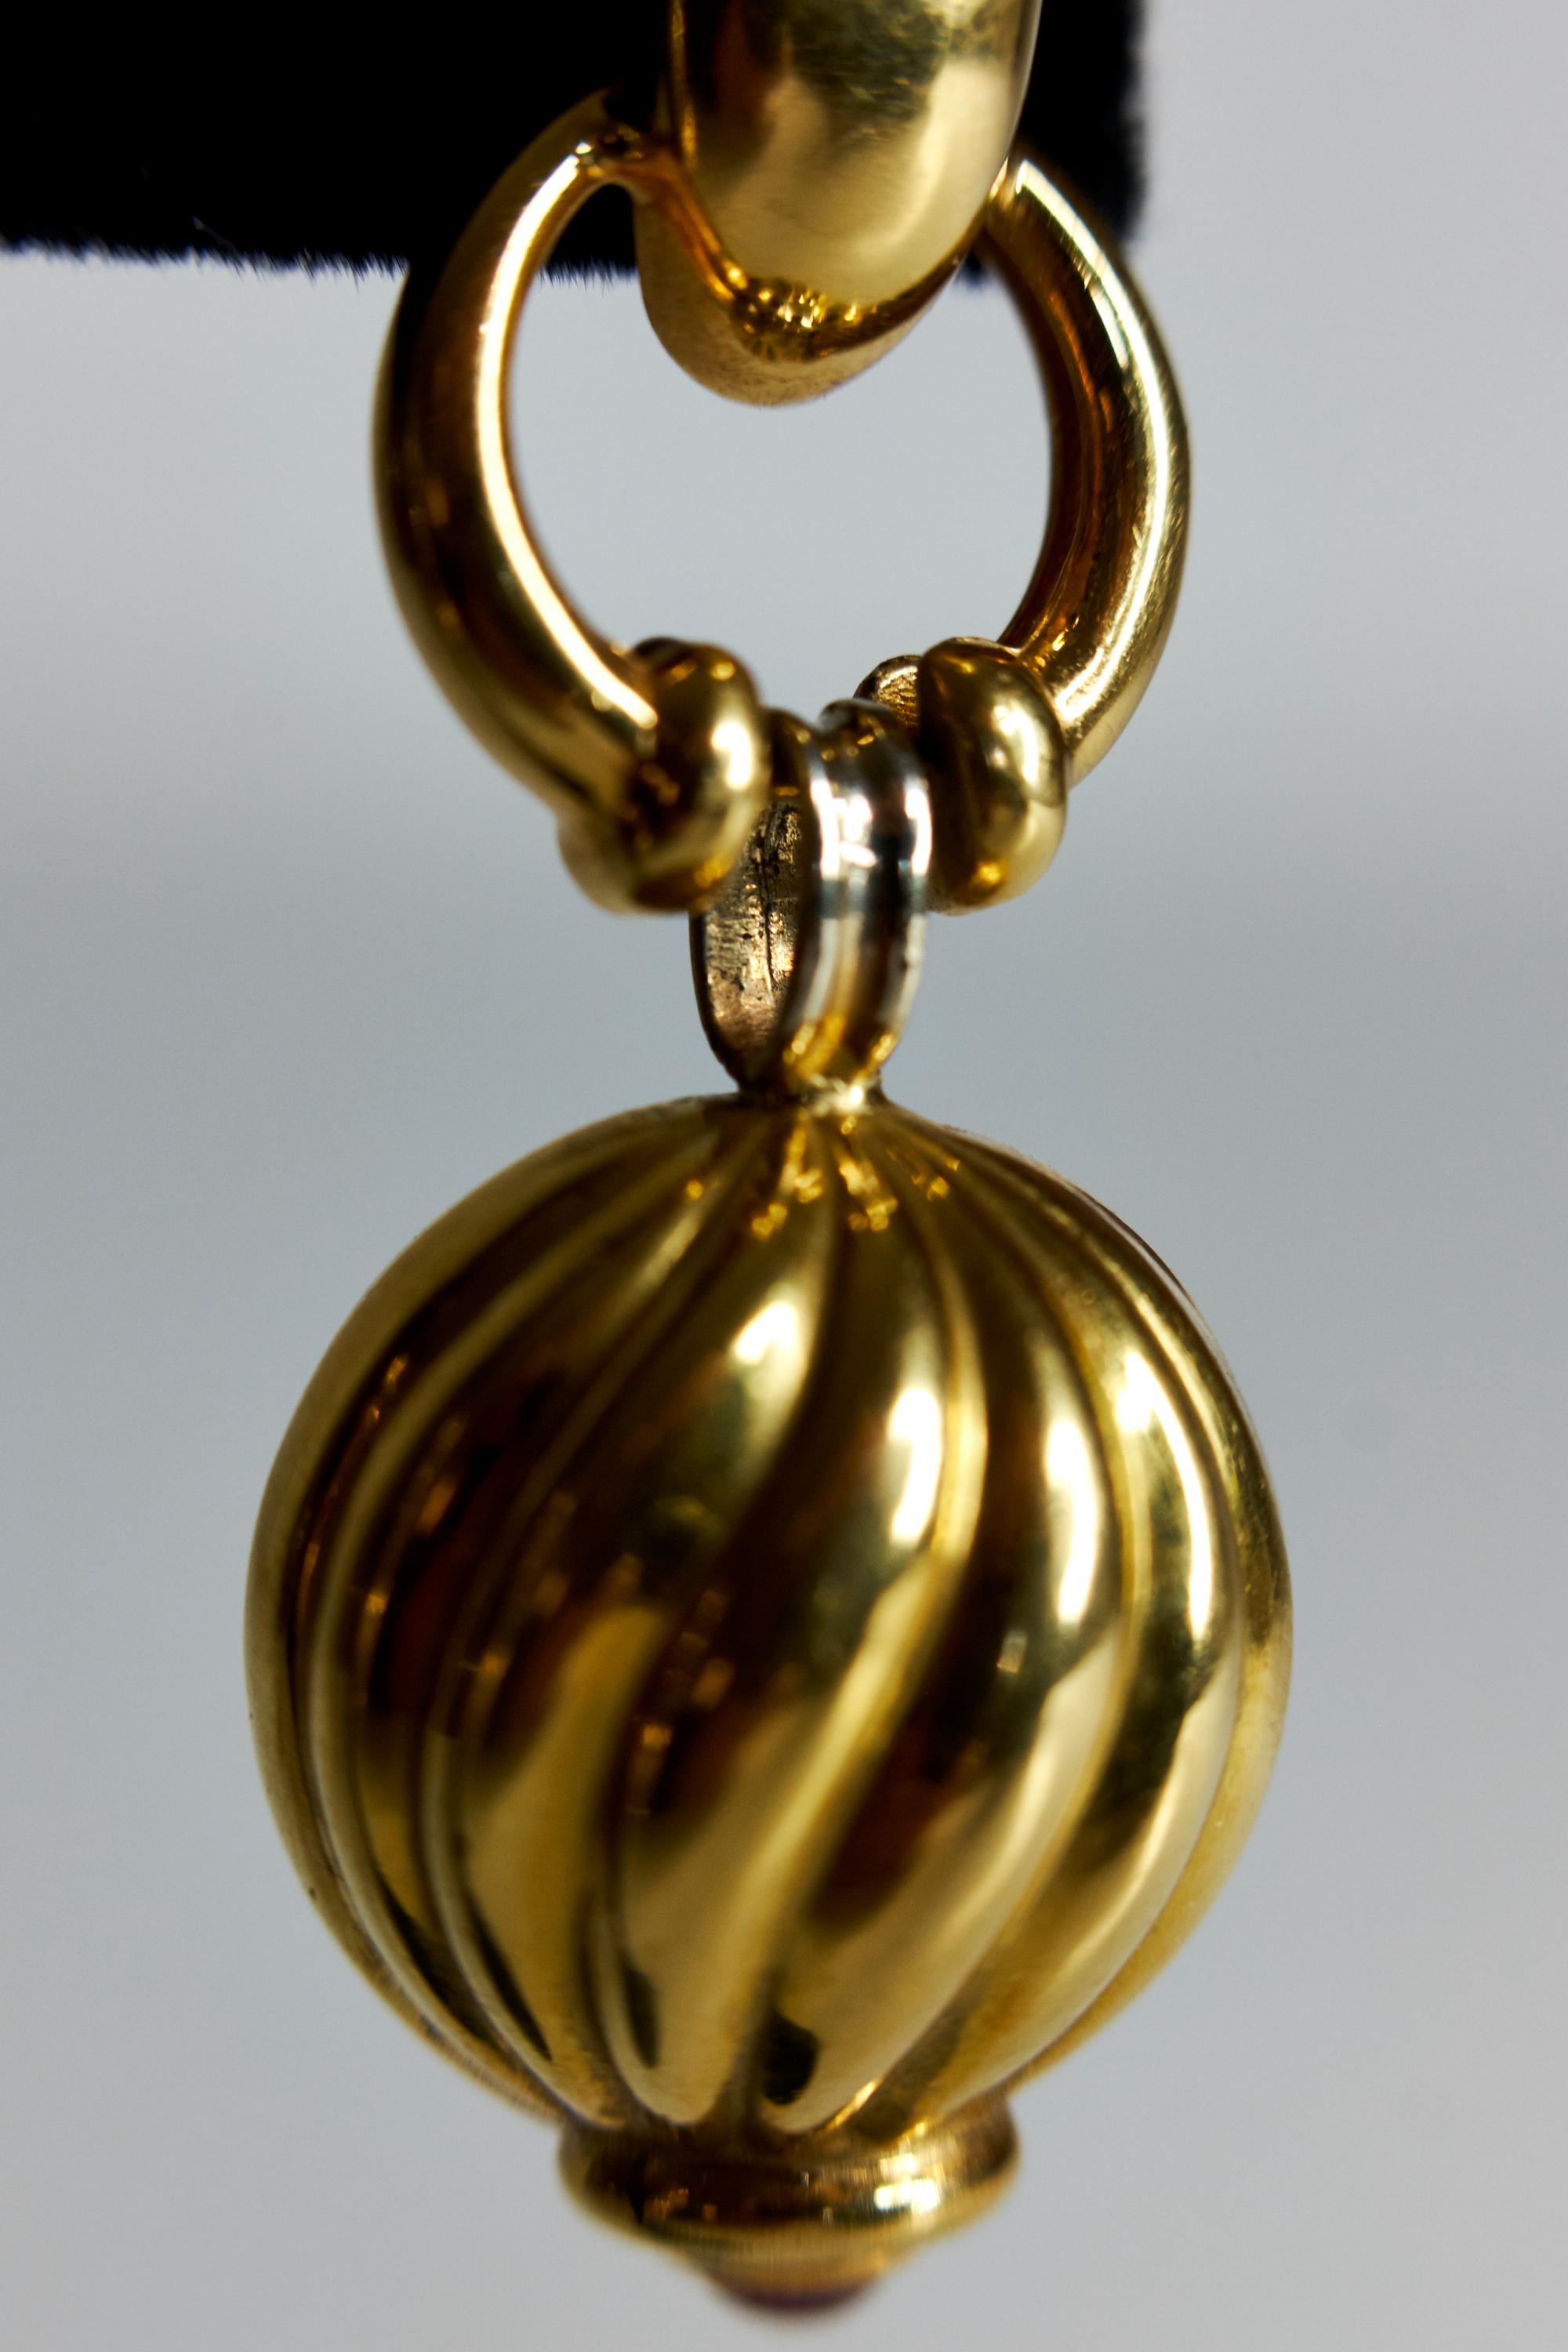 Door knocker earring pendants in 18k yellow gold with gold hoops leading to ribbed hanging orbs, each terminating with ruby cabochon finial. White gold connectors provide wonderful movement to the earrings which swing gently on the wearer. 

Length